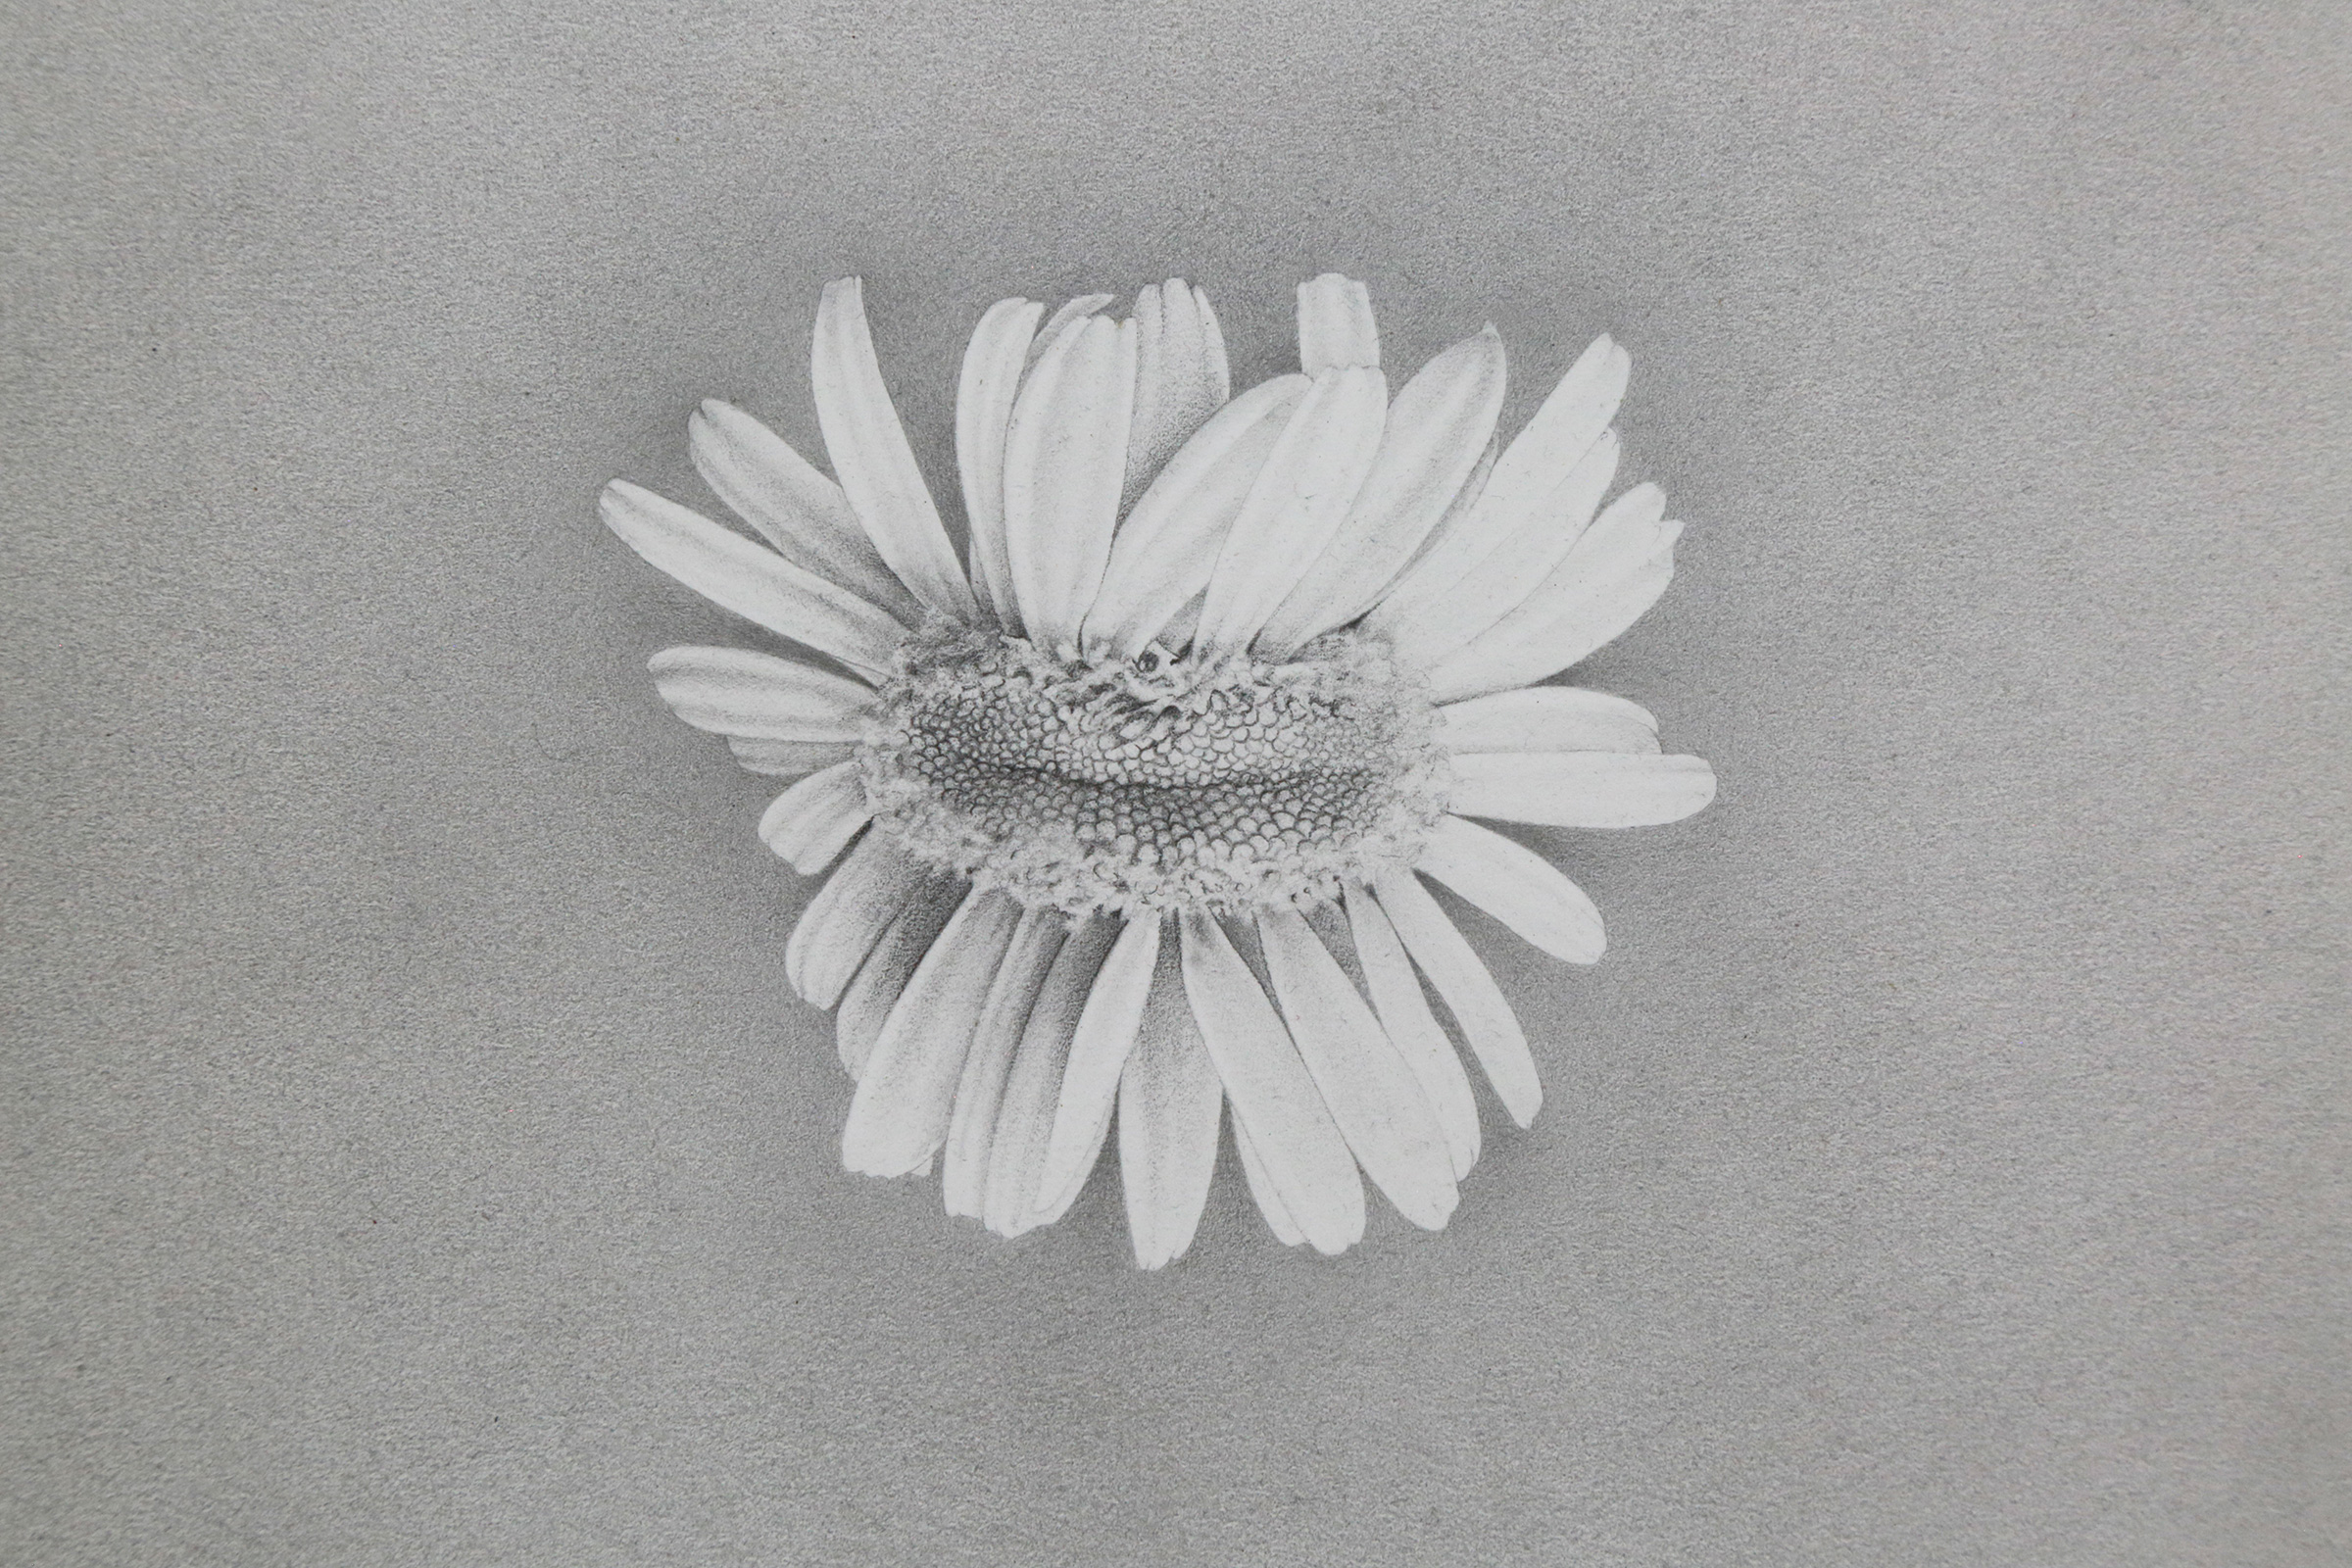 This is a graphite drawing of an extraordinarily mutated daisy flower that's stretched out so far that it resembles a caterpillar. The blossom is centered in the middle of the drawing, surrounded by a matte, gray background also drawn in graphite.